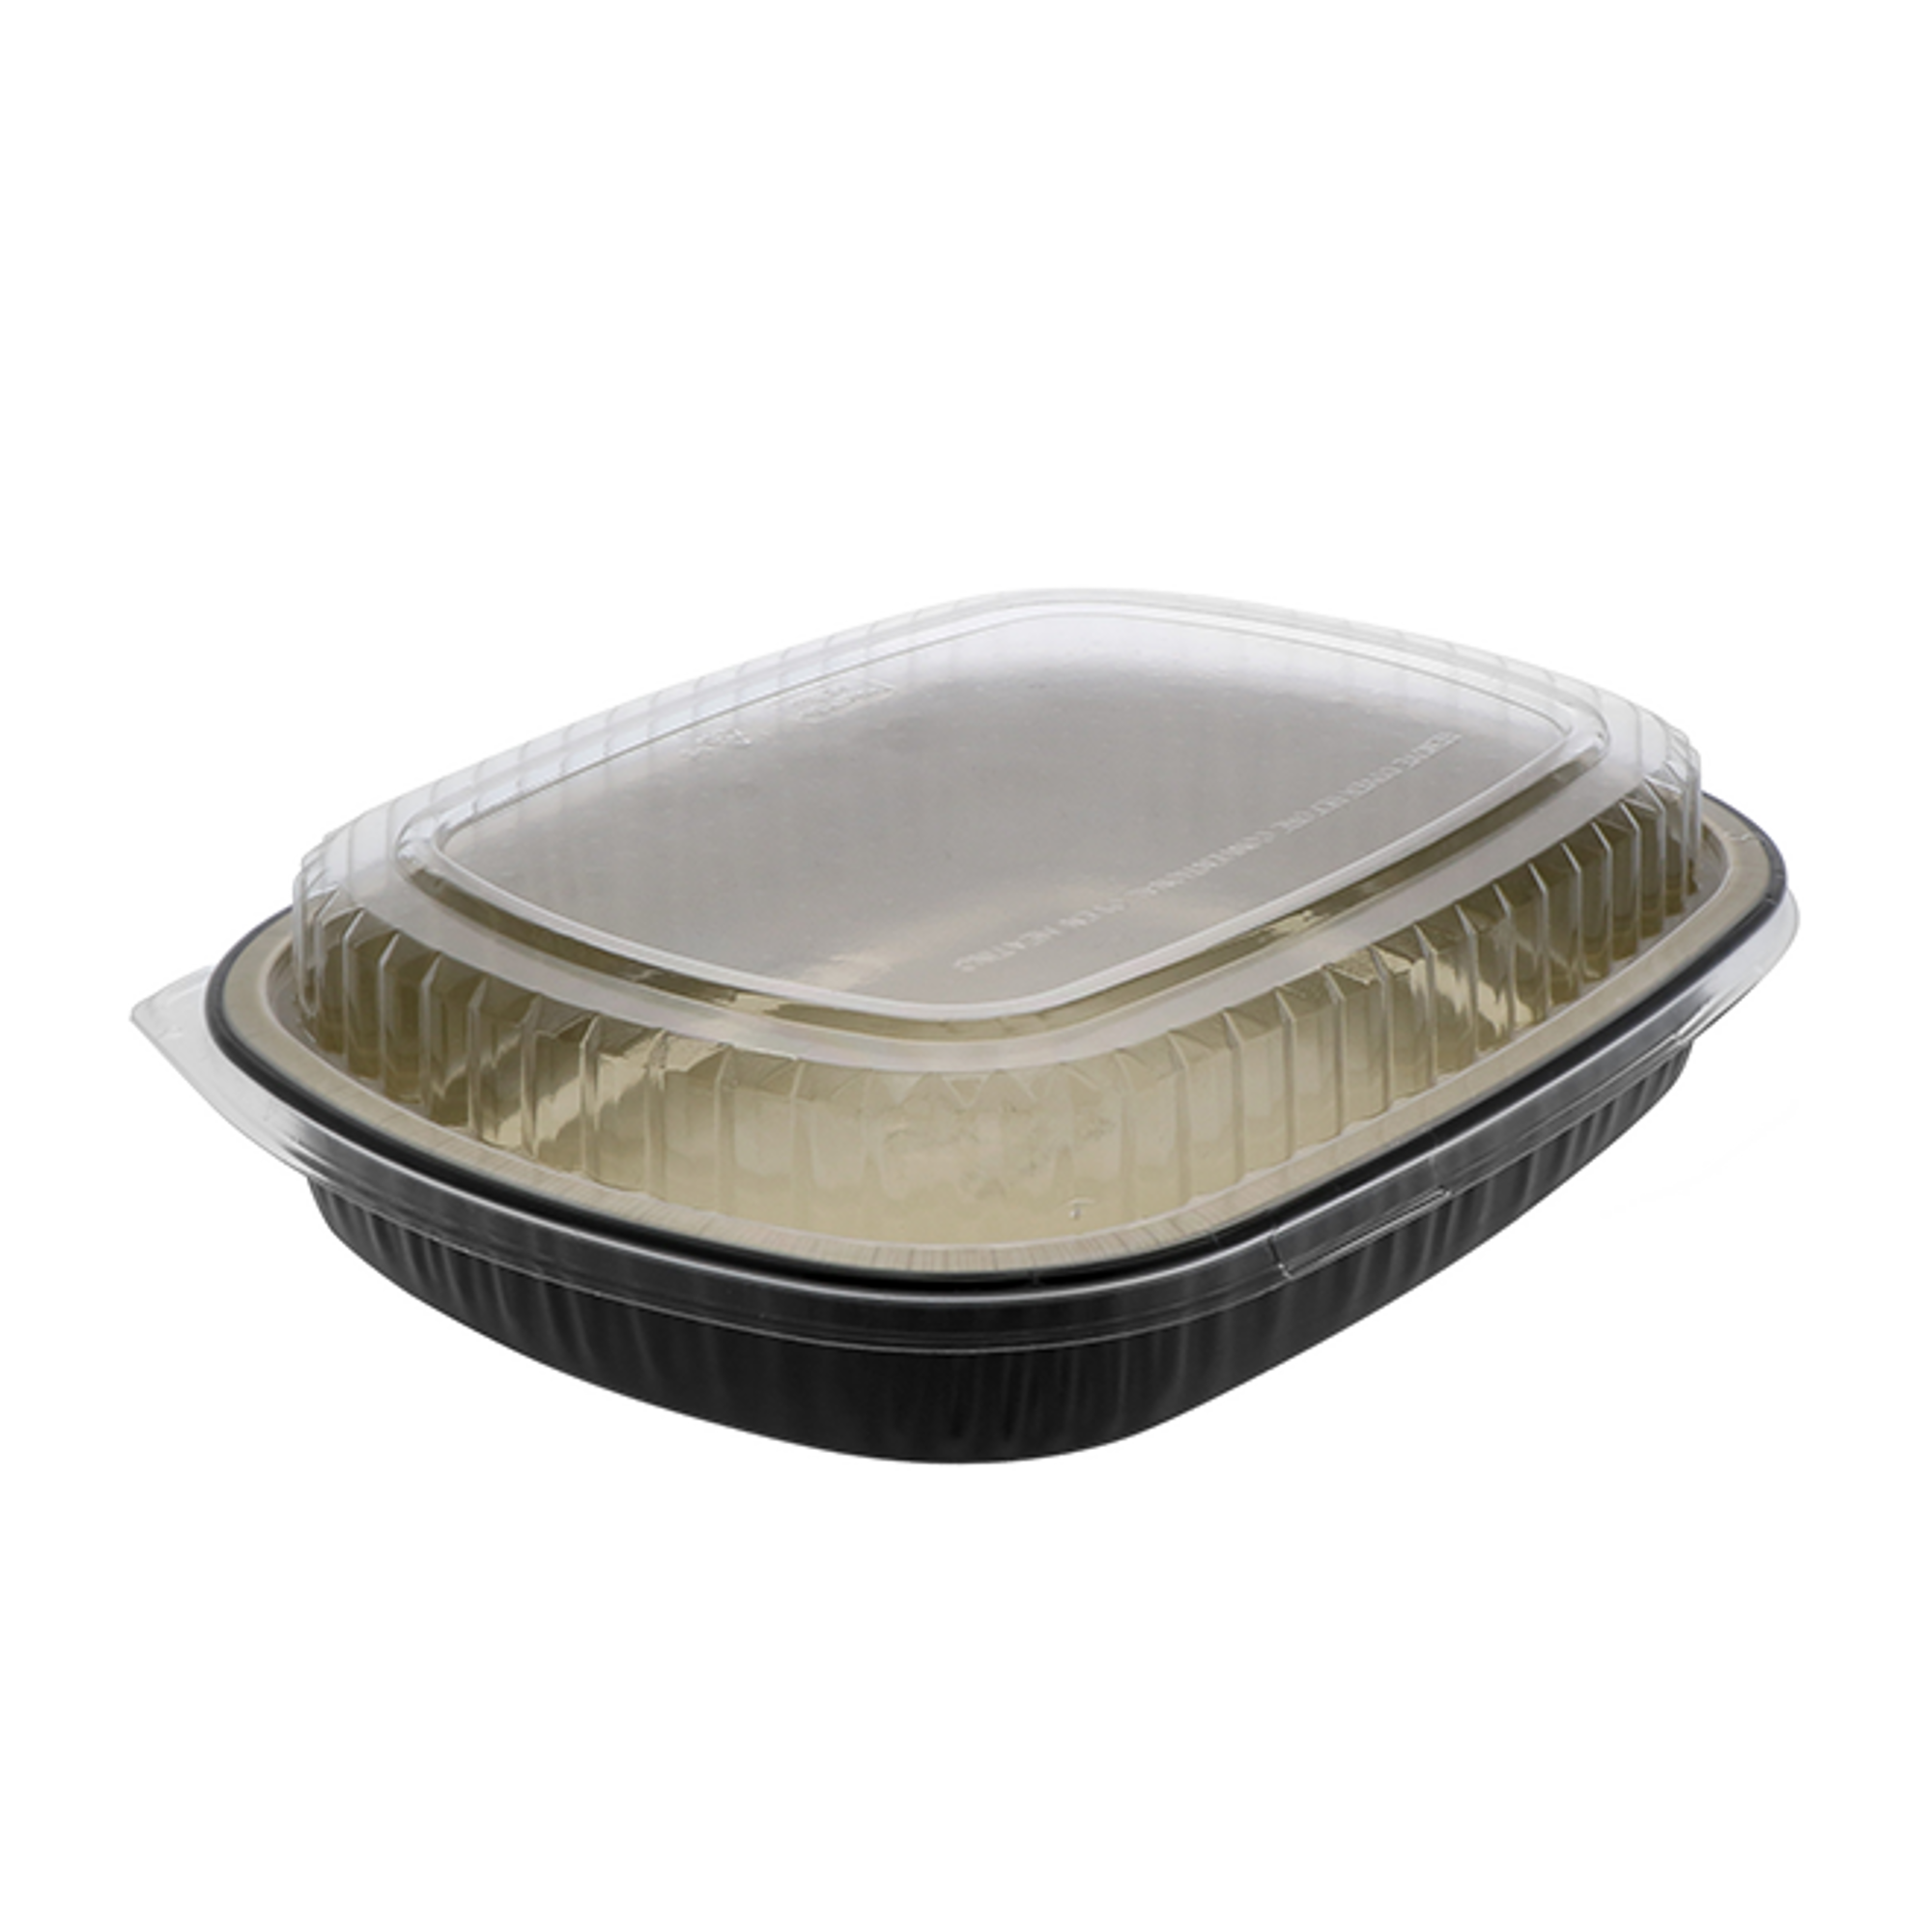 Large 64 oz. Black and Gold Foil Entrée or Take Out Pan with Dome Lid -  Case of 50